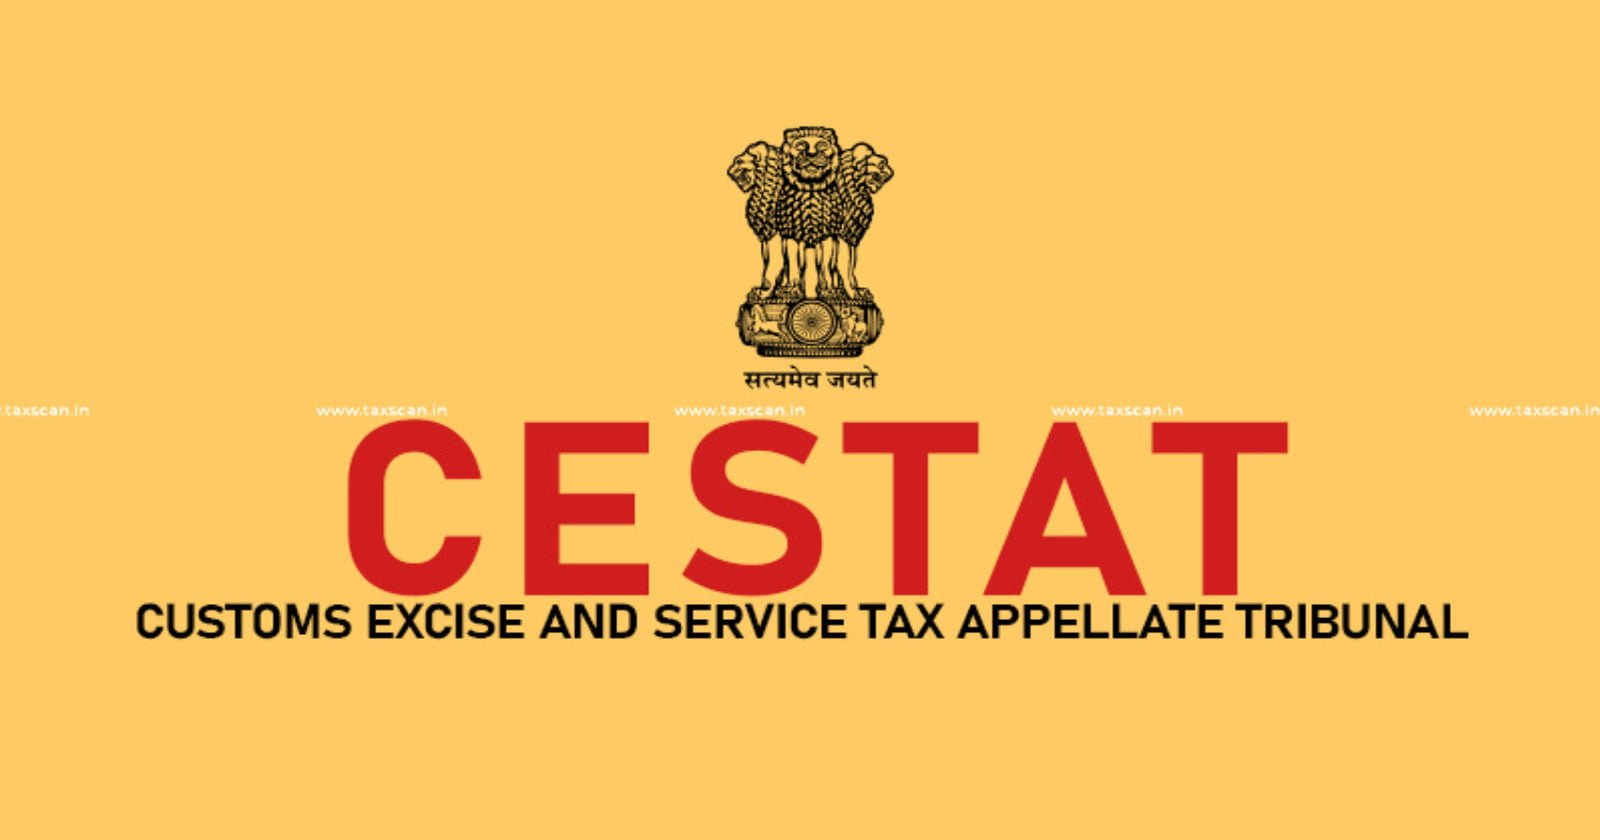 Mere Omission - Excise department - Registration of Product - Insecticide Act - Registration - Wilful Misstatement - Wilful Misstatement of Fact - Penalty - CESTAT - Customs - Excise - Service Tax - taxscan